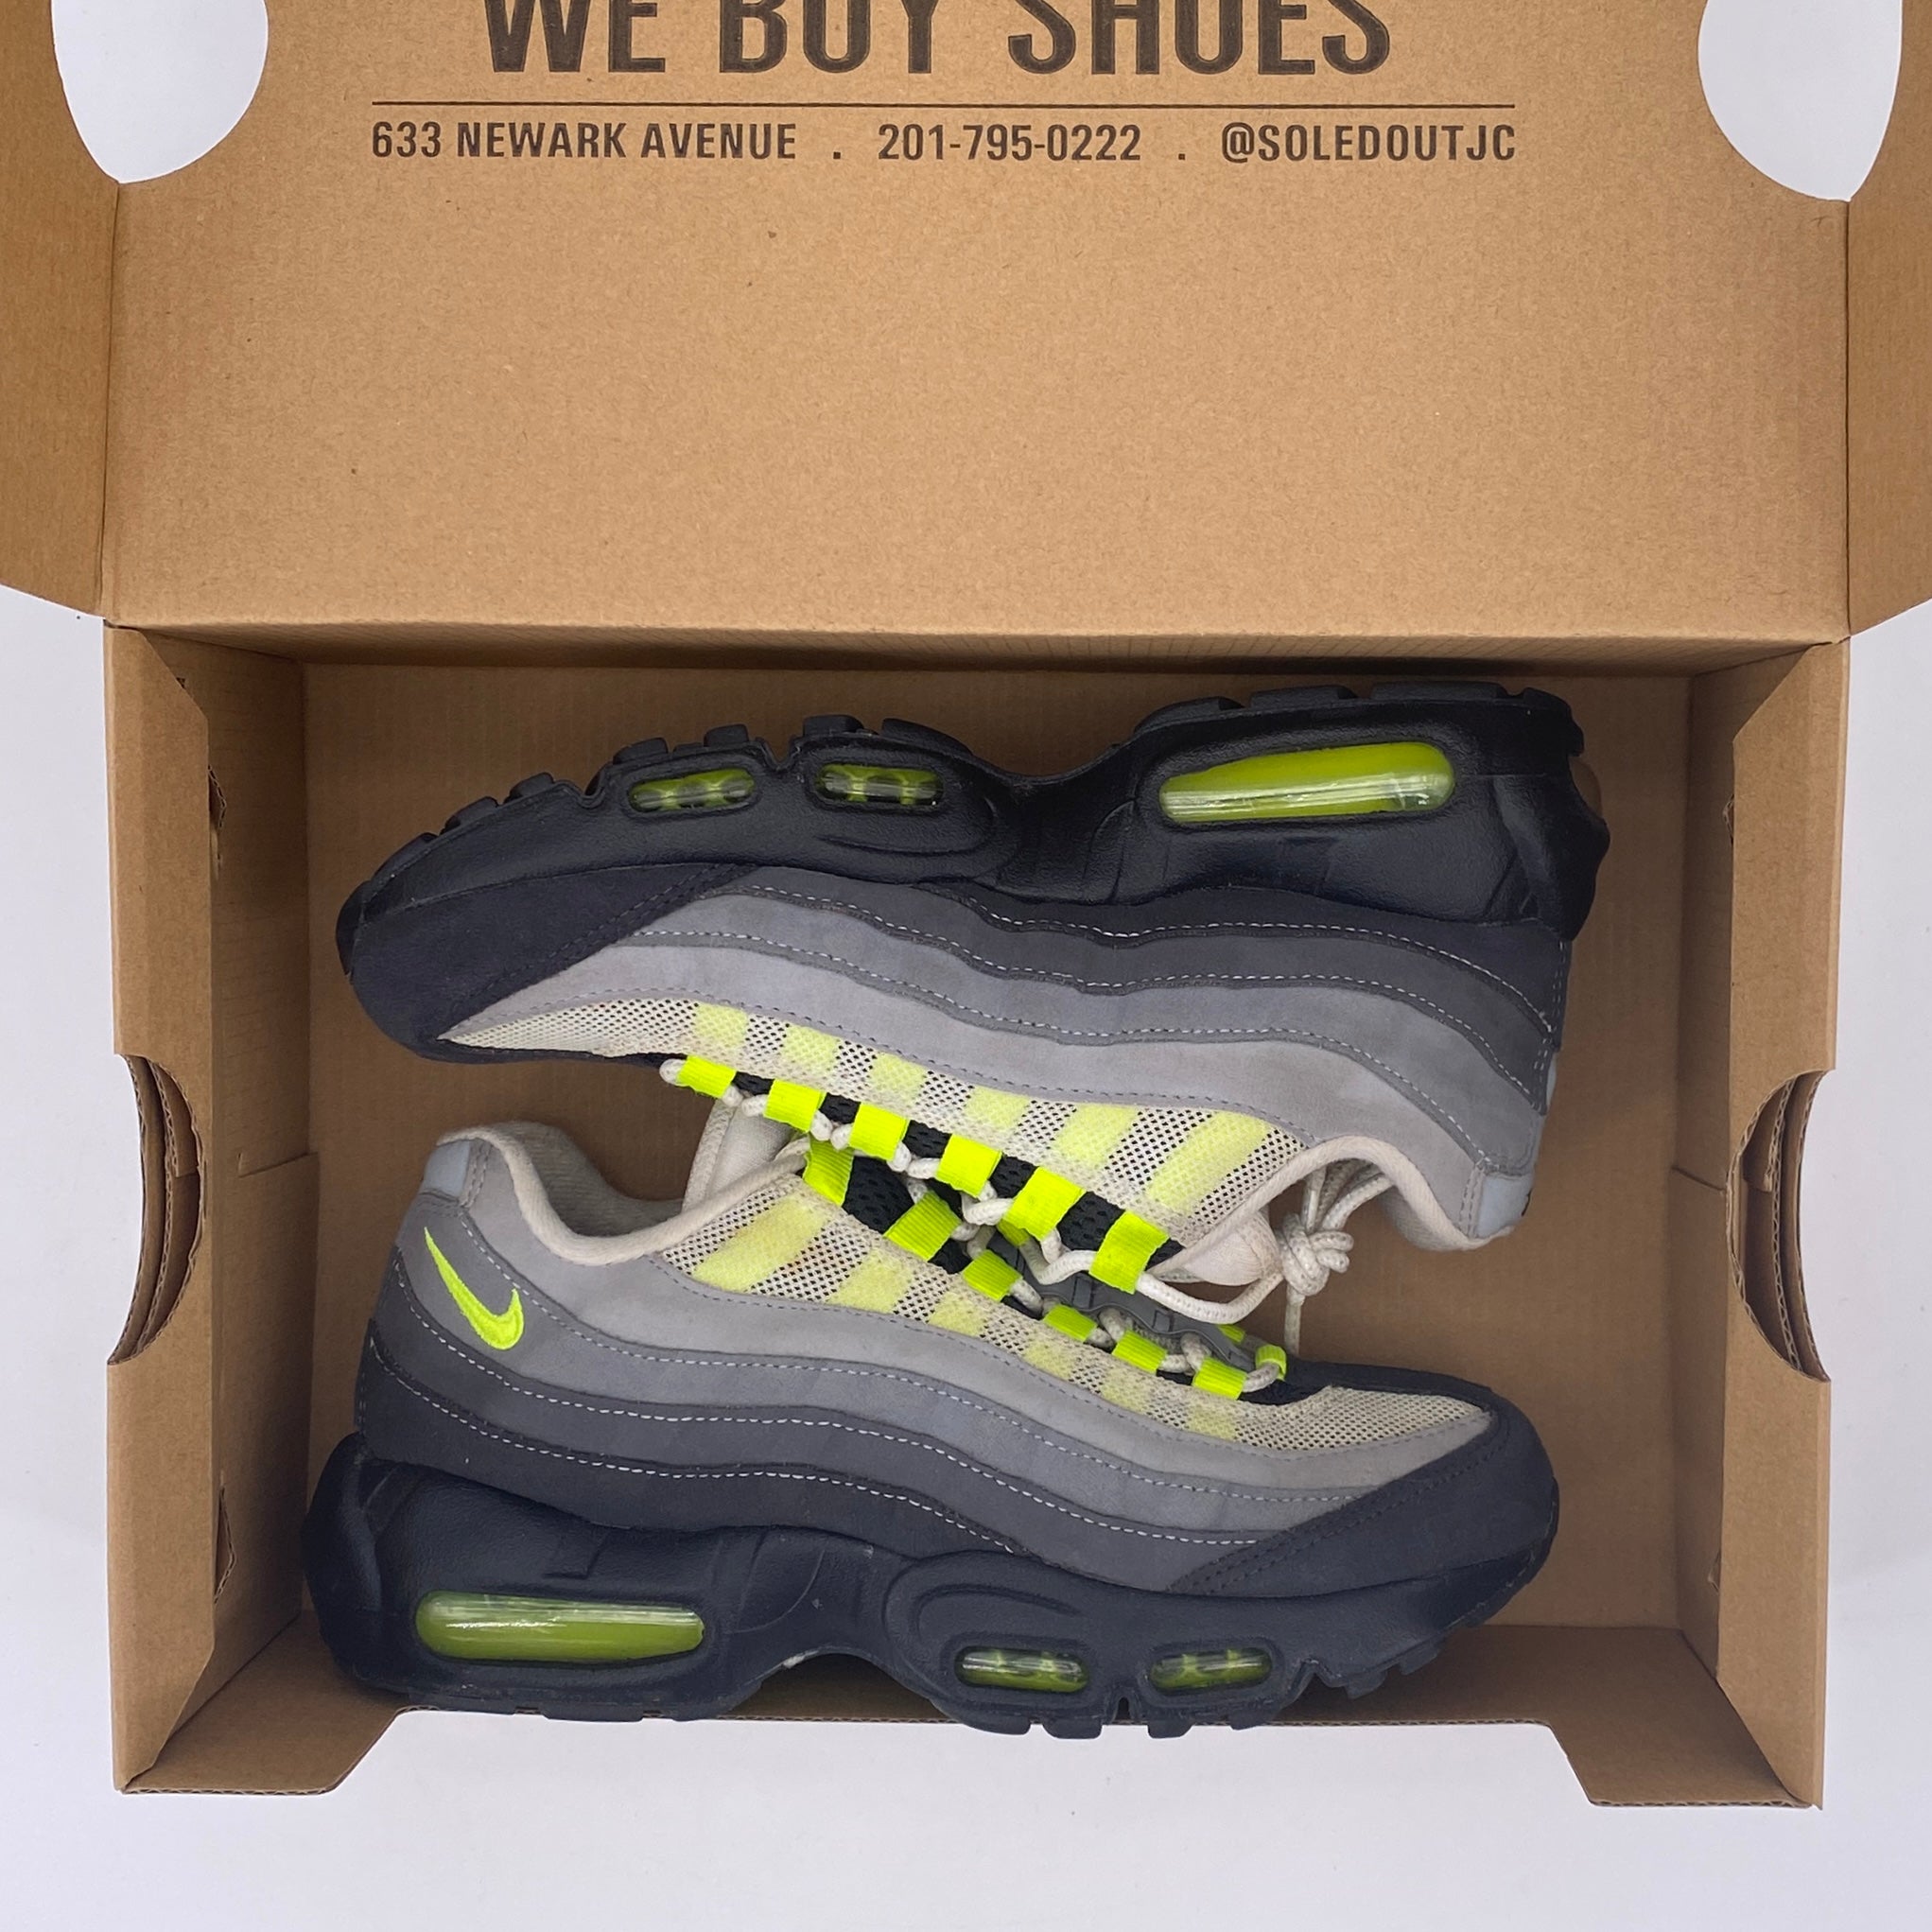 Nike (GS) Air Max 95 "Neon" 2020 Used Size 6.5Y